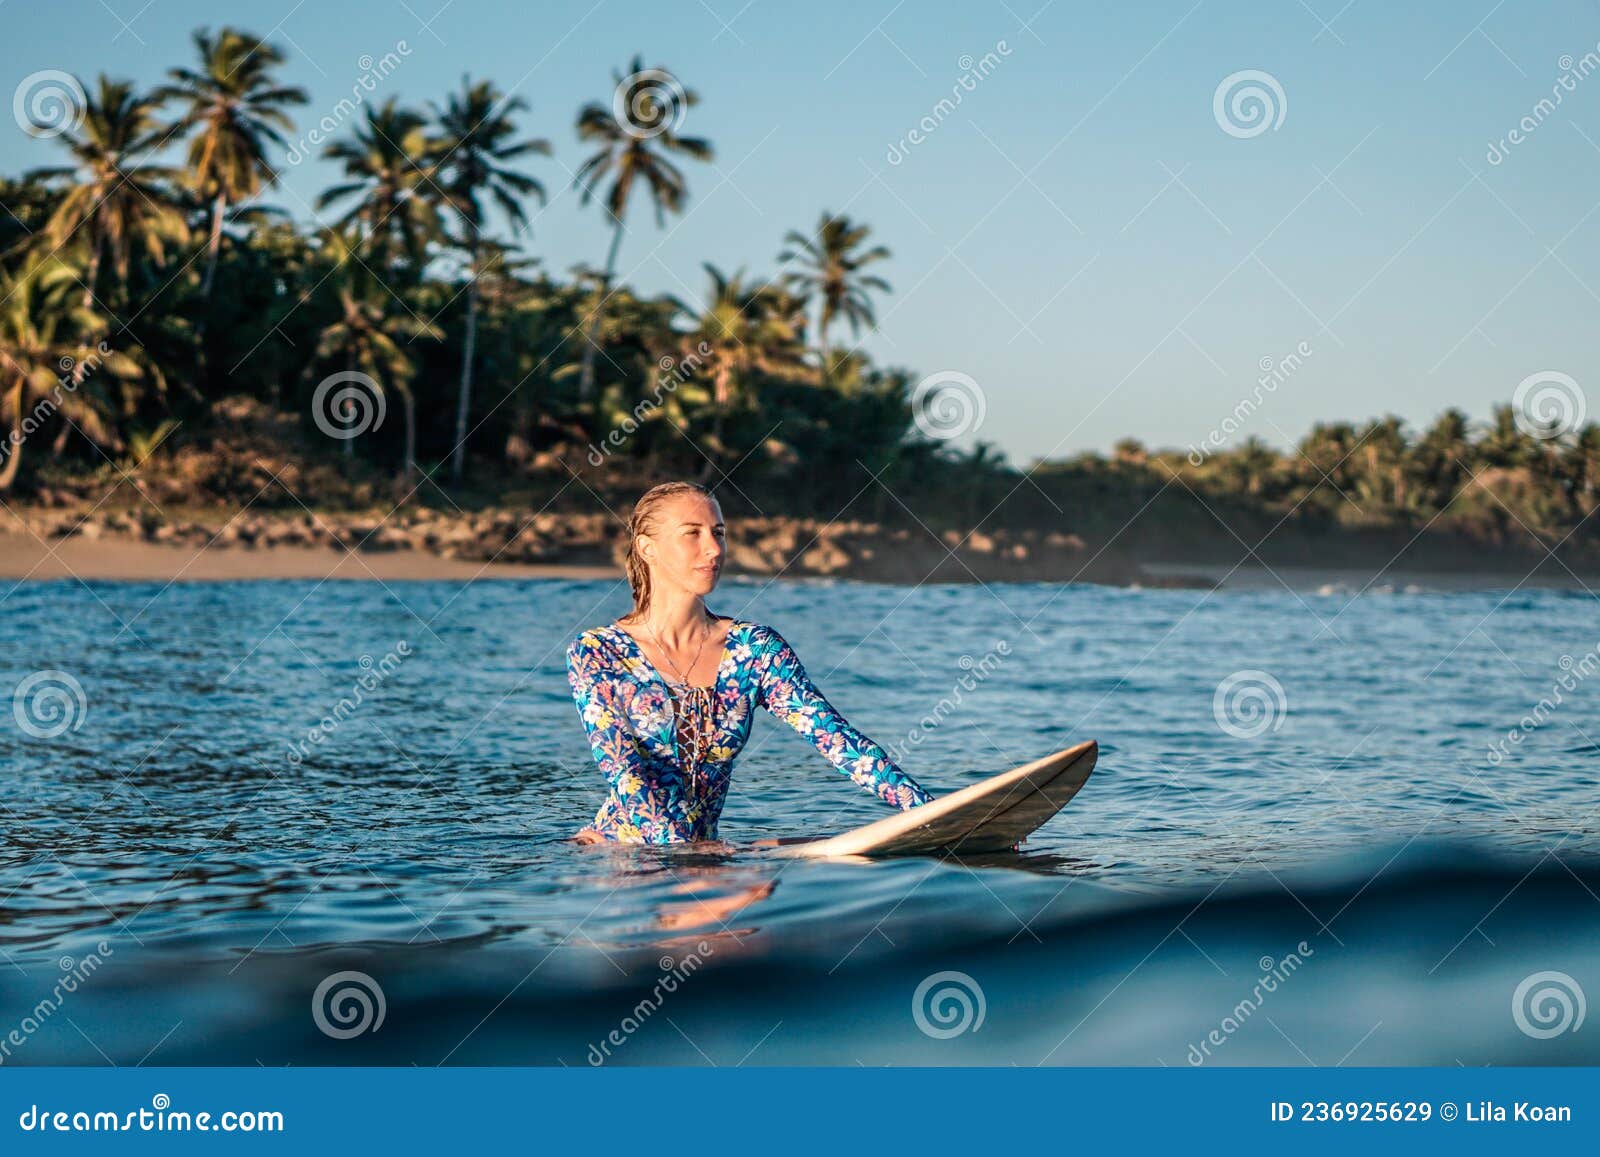 portrait of blond surfer girl on white surf board in blue ocean pictured from the water in encuentro beach